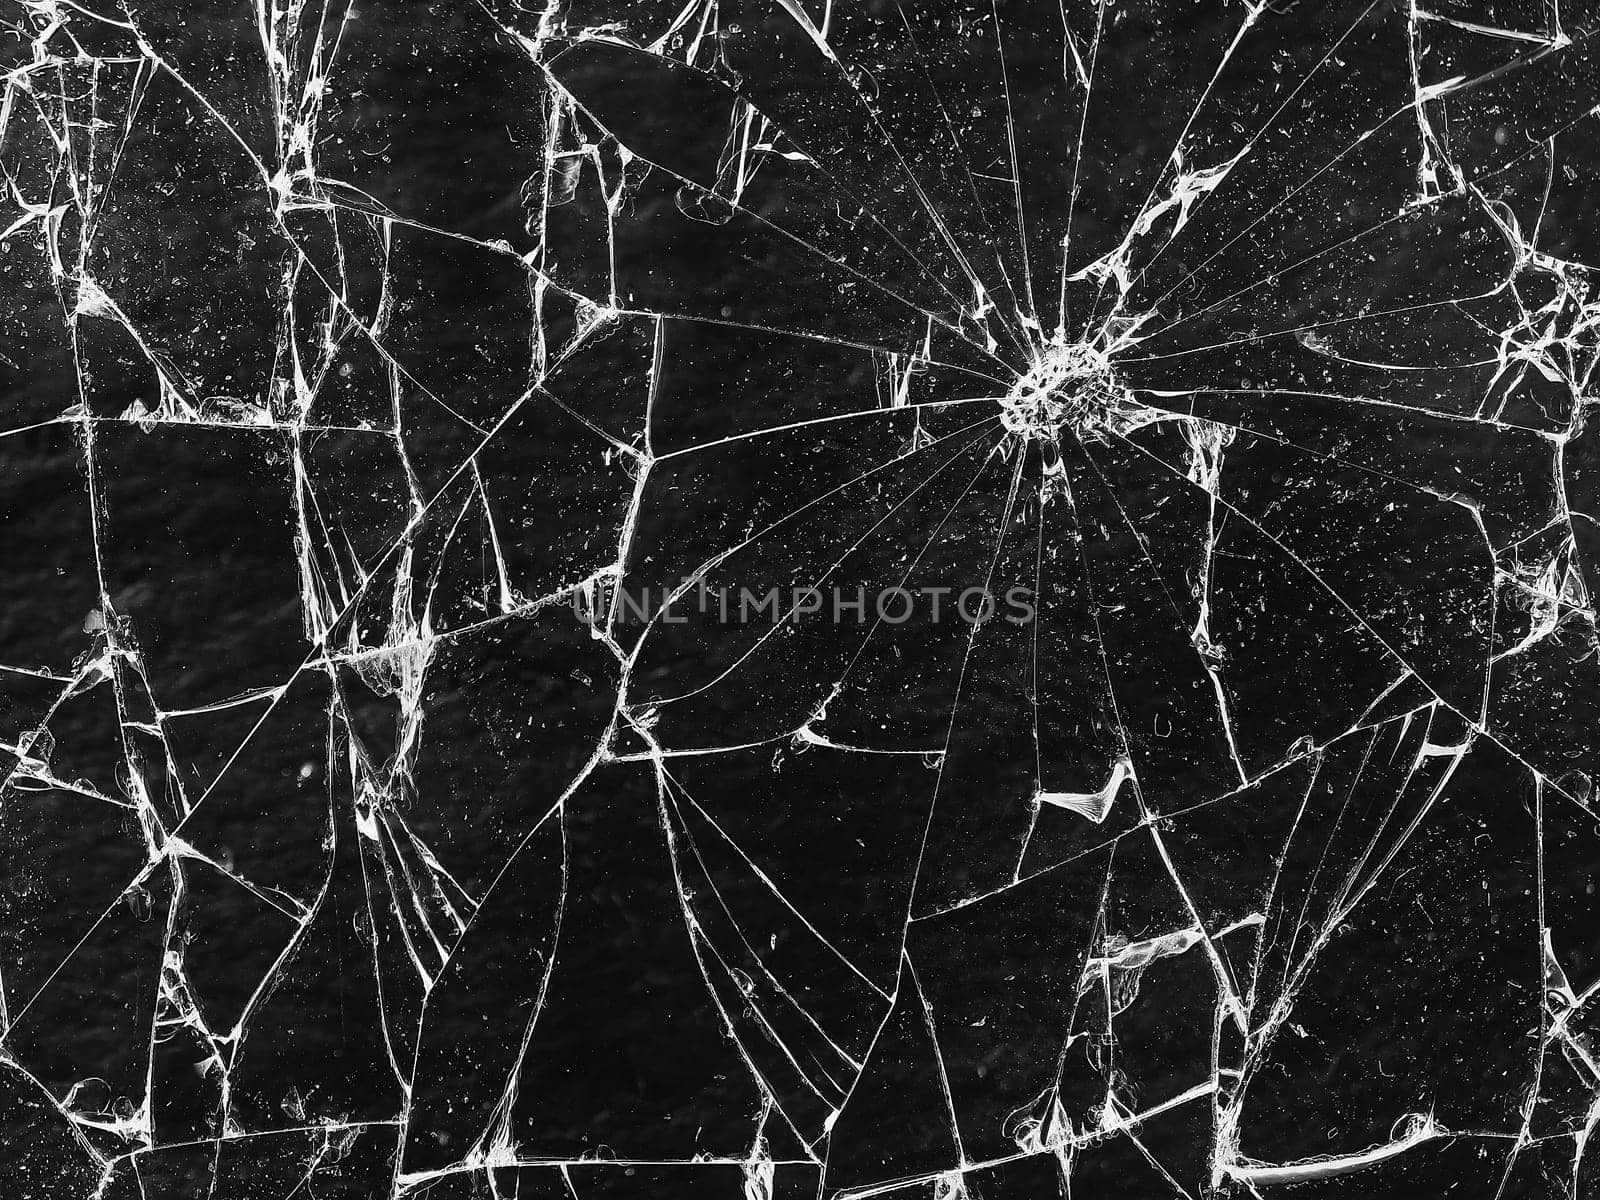 Shards of broken glass on a dark background reflecting highlights, chaotically scattered, some overlapping. Fractures and chips visible in places. Creates a sense of fragility and breaking apart into pieces.